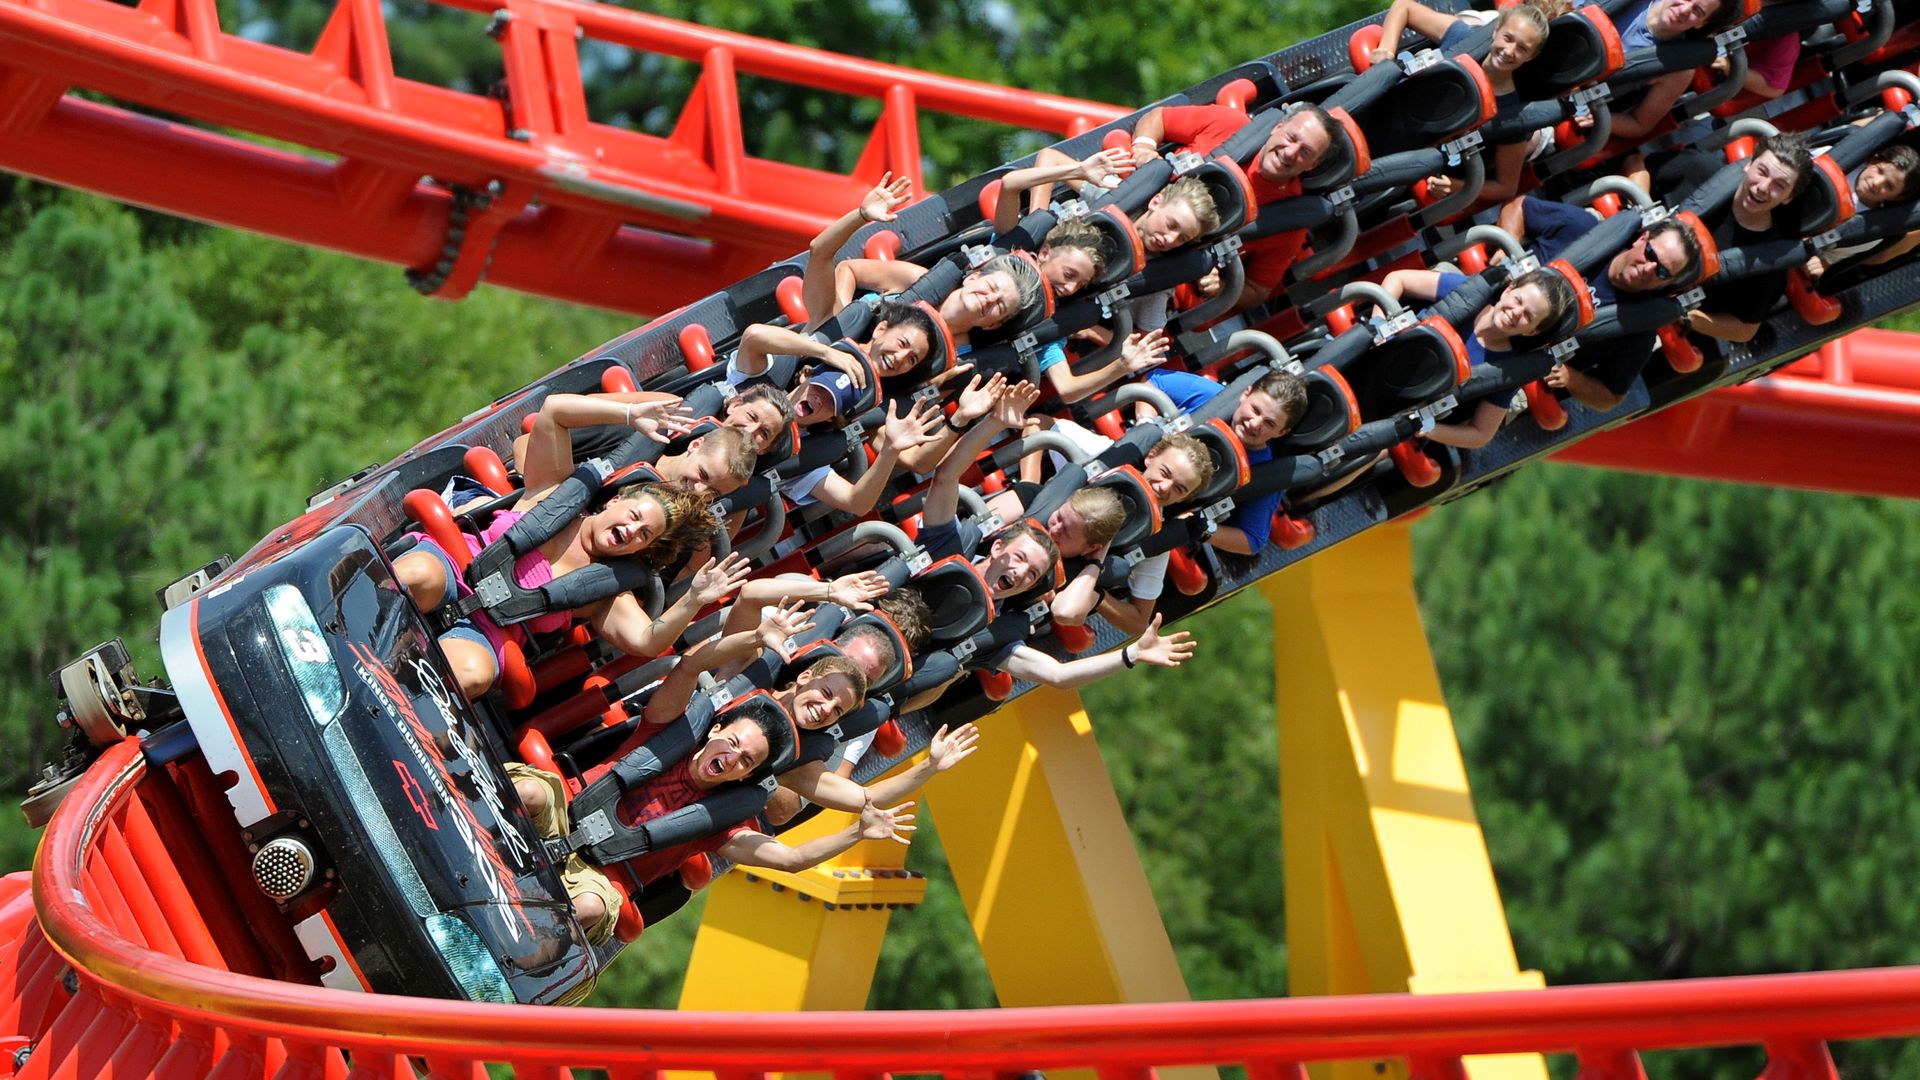 Kings Dominion on X: Limited-time deal on Kings Dominion